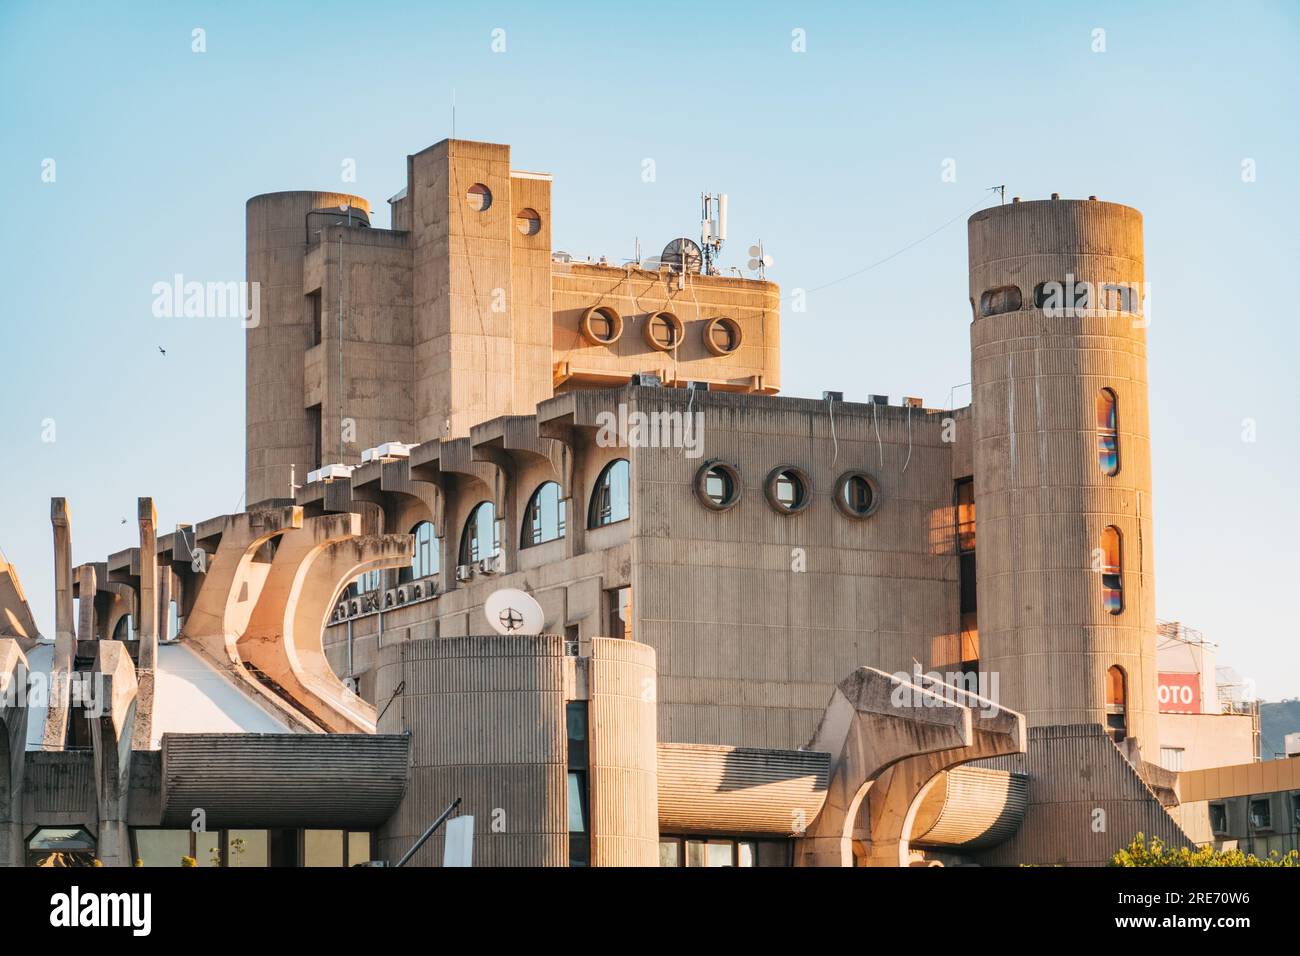 The highly unusual looking Central Post Office in Skopje, North Macedonia. A quirky, brutalist architecture style, completed in 1989 Stock Photo